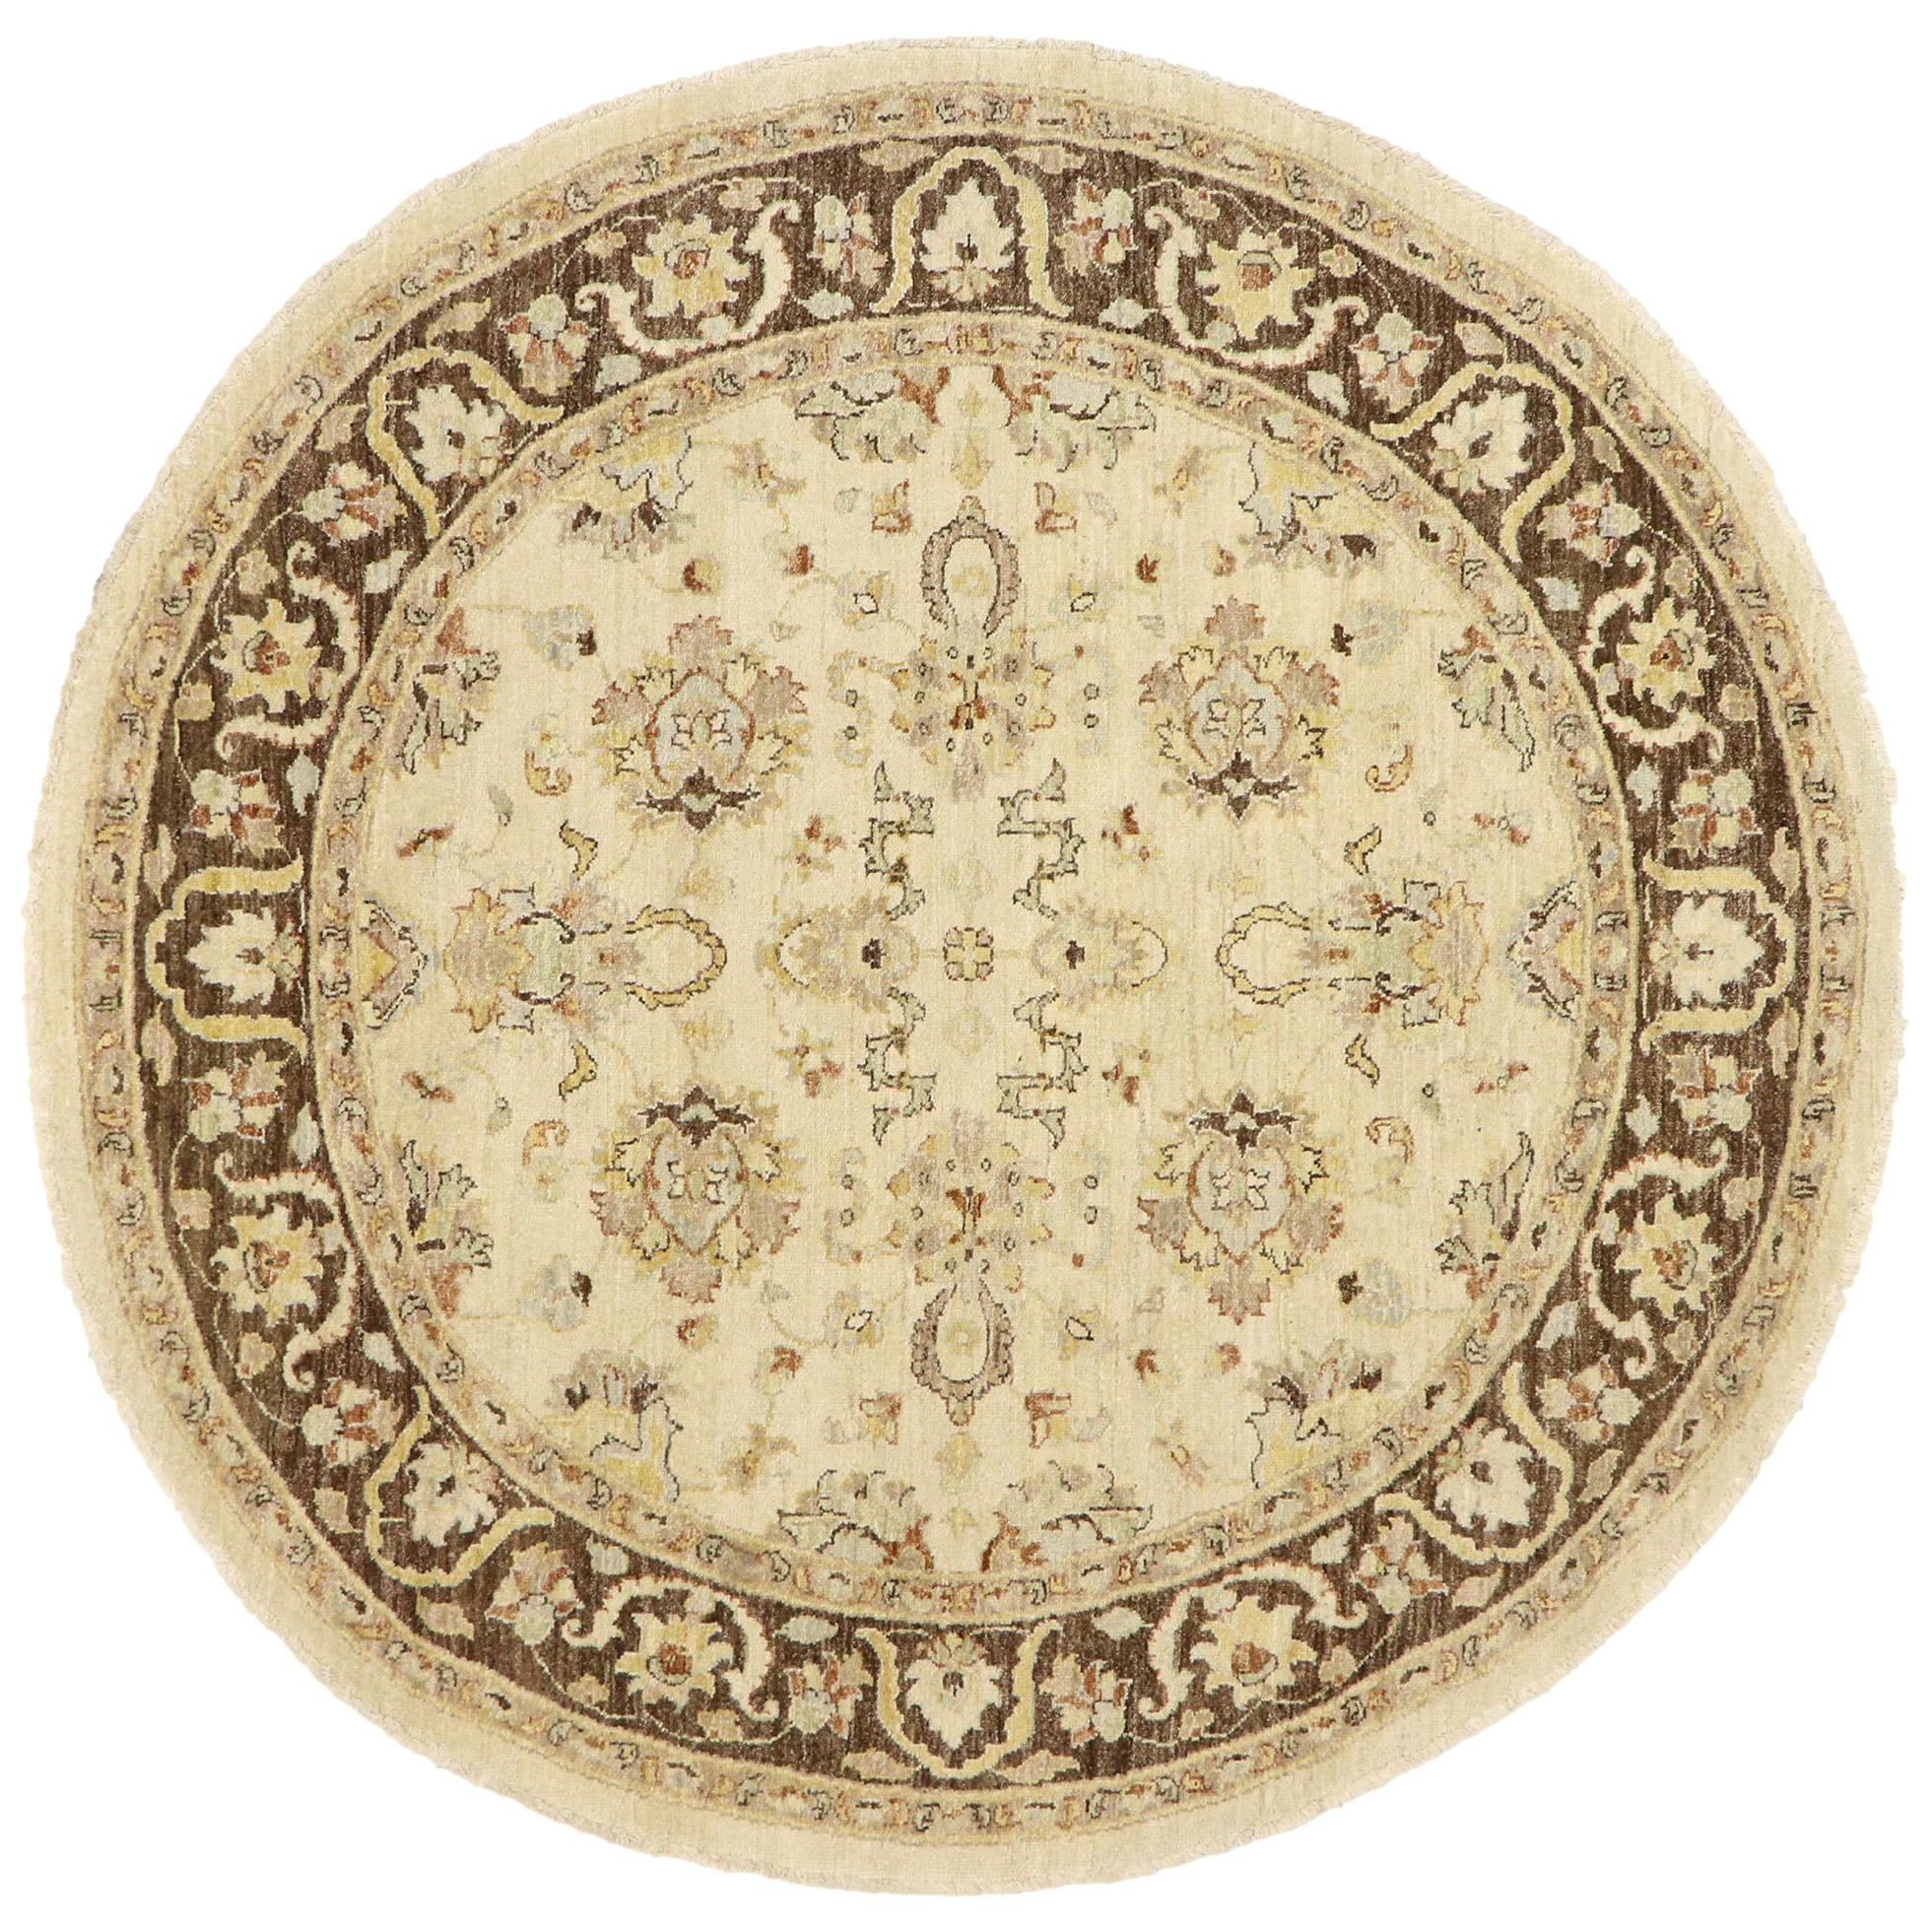 Vintage Indian Round Area Rug, Circular Rug with Warm Farmhouse Cottage Style